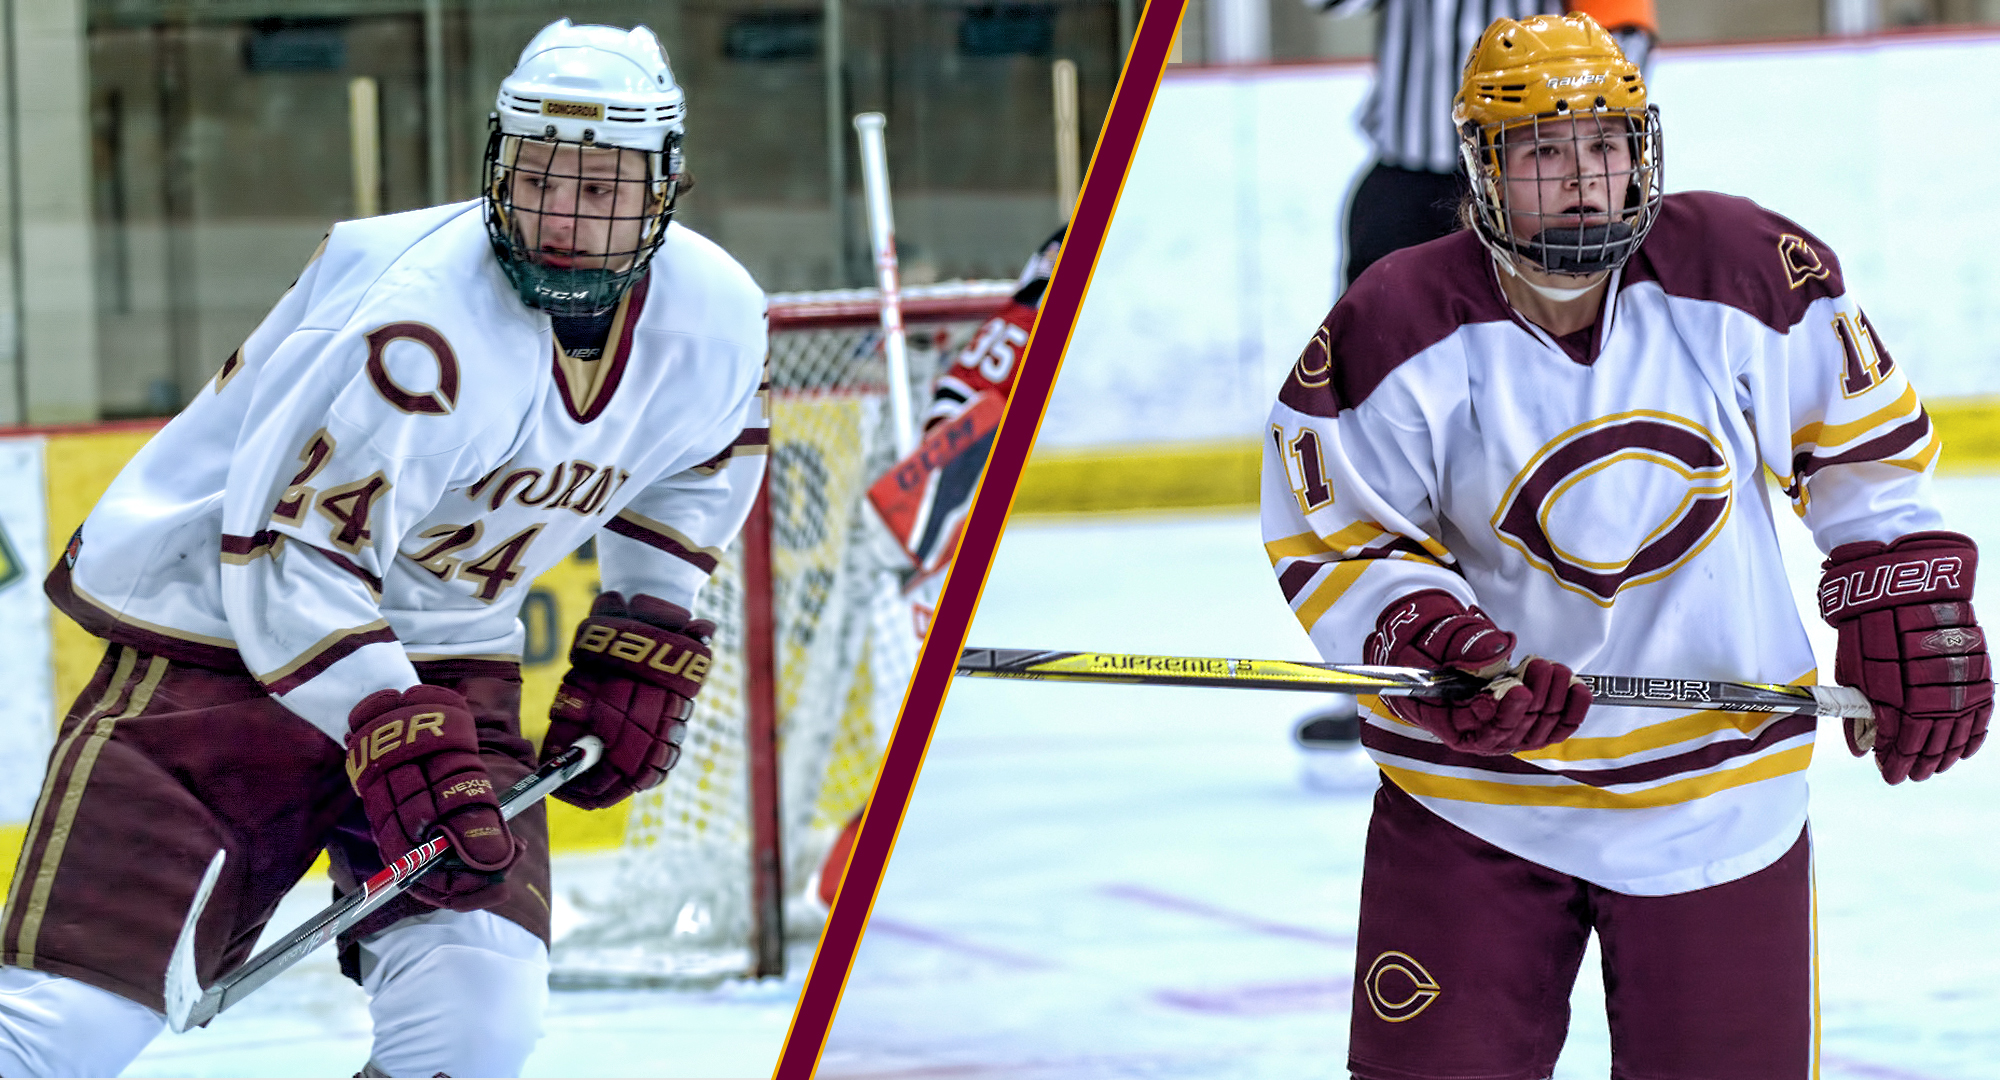 Jake Ellingson is a member of the Cobber men's hockey team while sister Maddie skates on the women's squad.